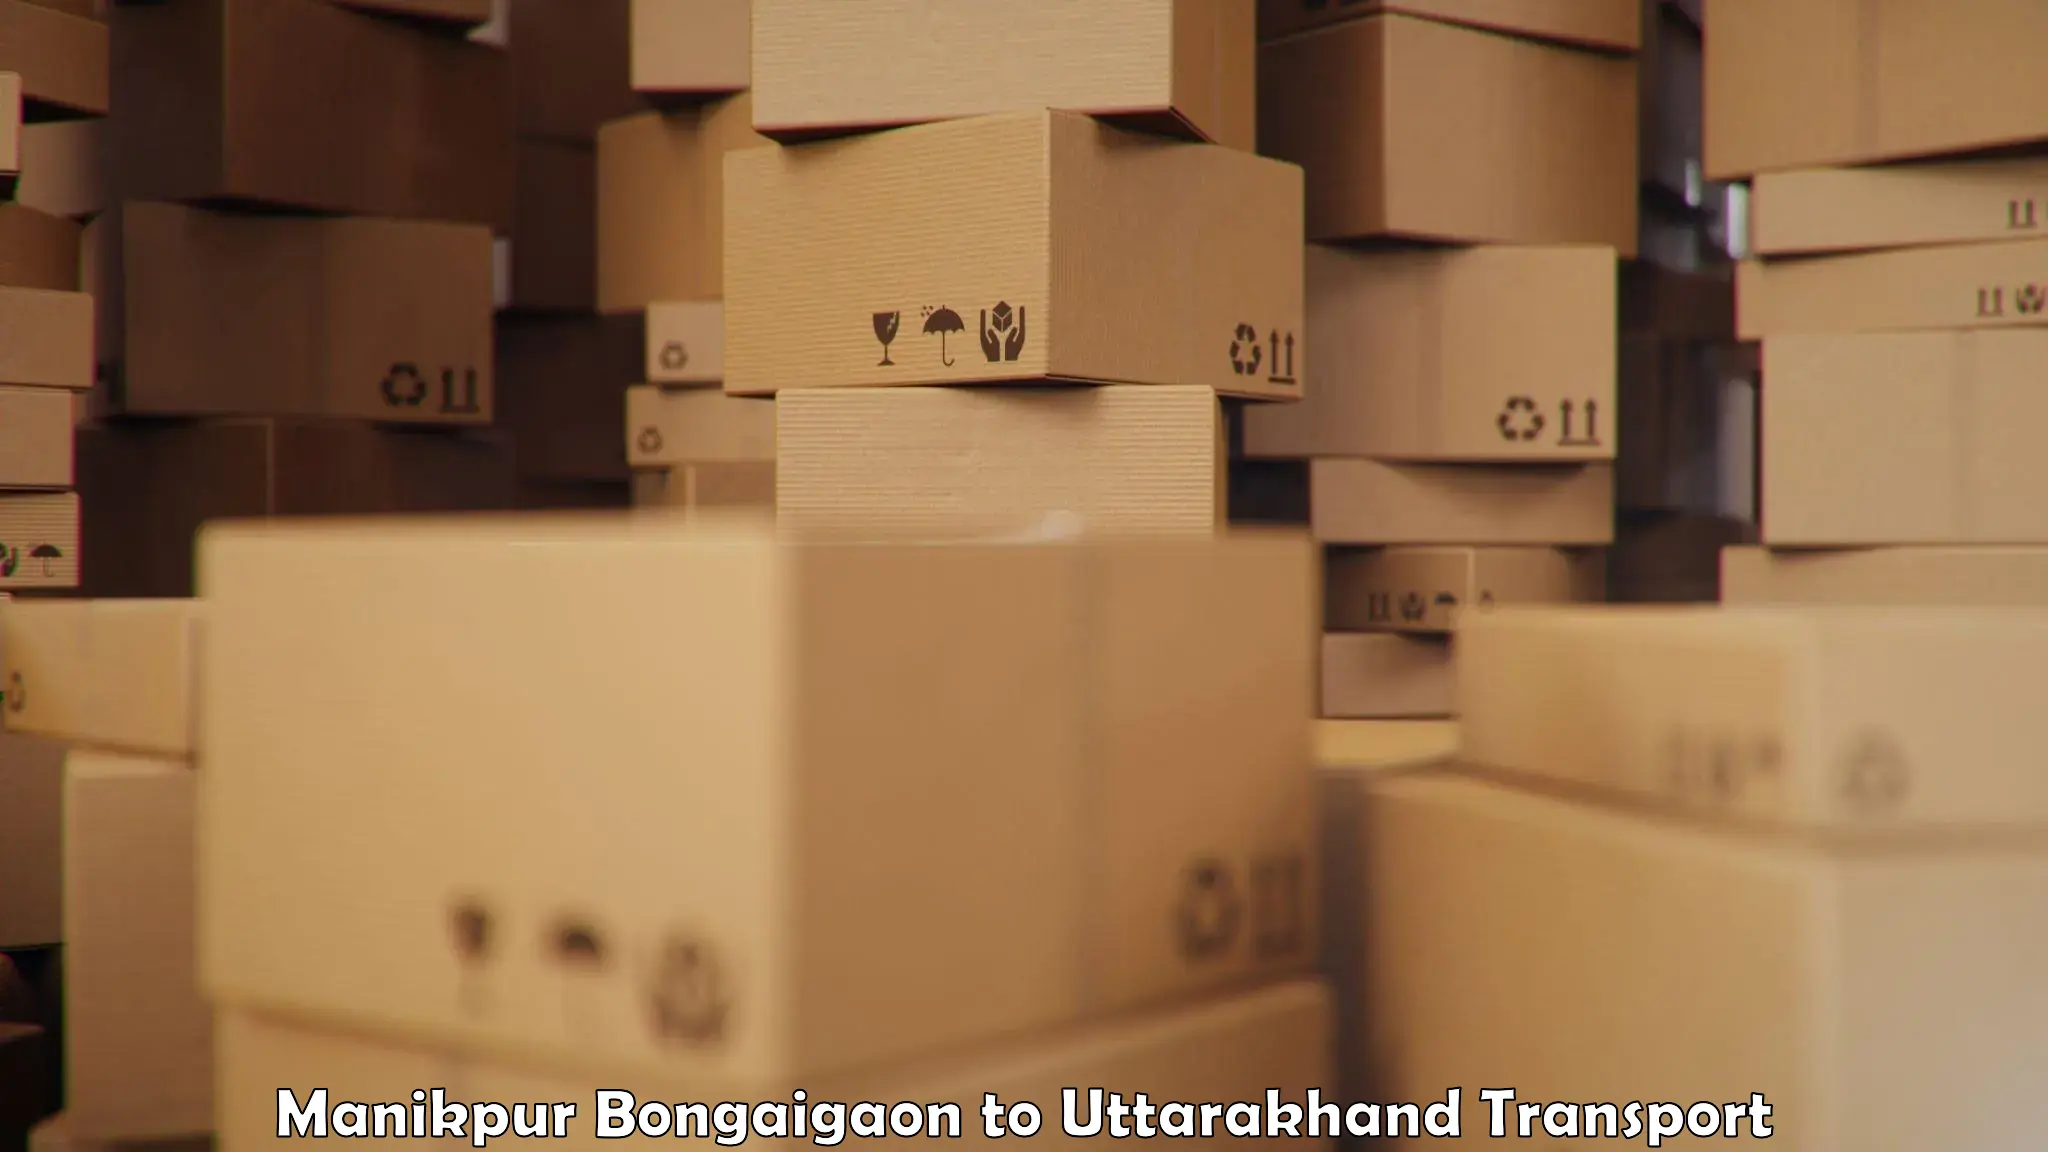 Part load transport service in India Manikpur Bongaigaon to Rudrapur